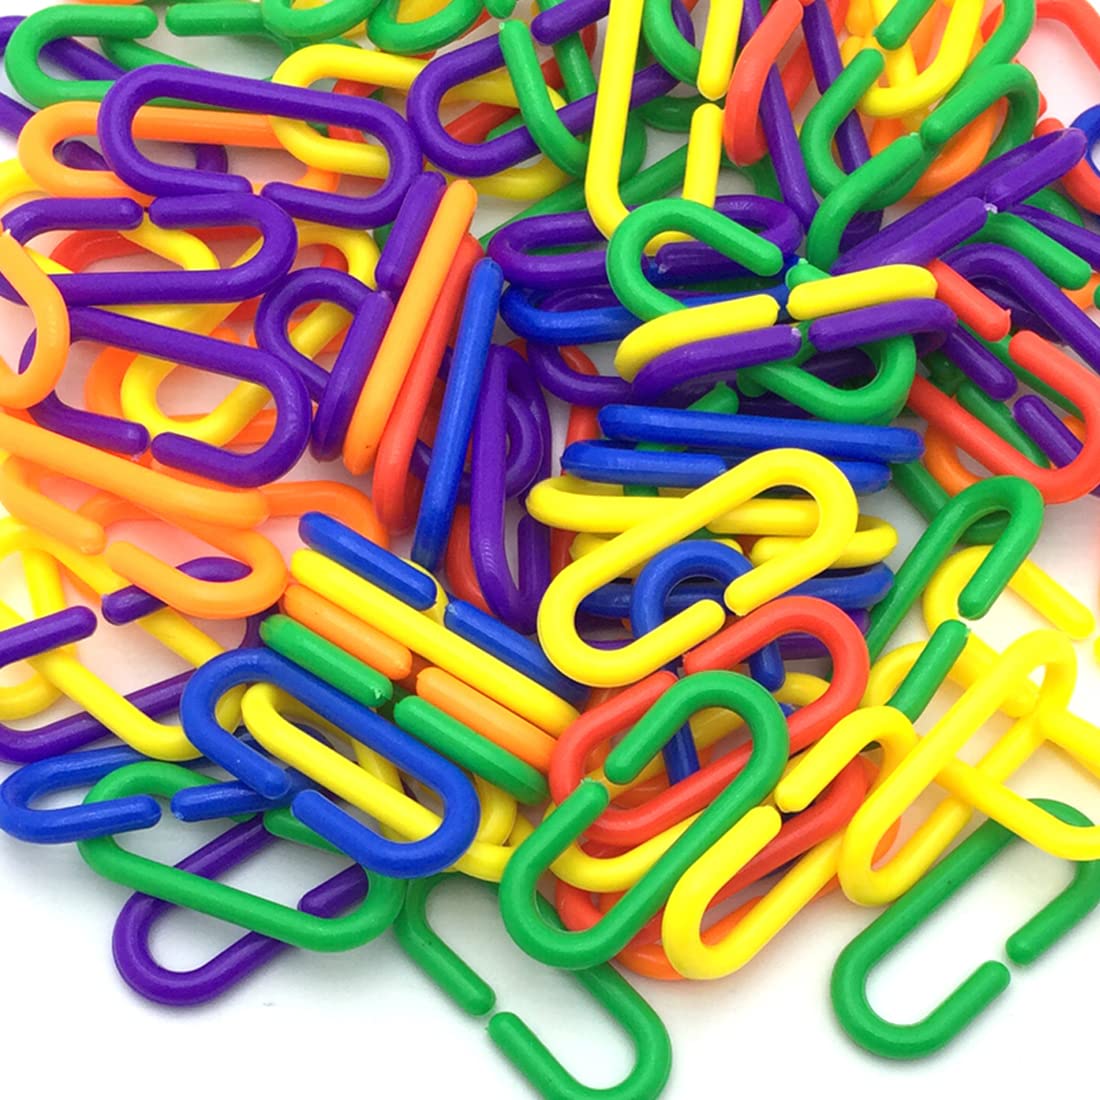 JIALEEY 100 Piece Plastic C-Clips Hooks Chain Links Rainbow C-Links  Children's Learning Toys Small